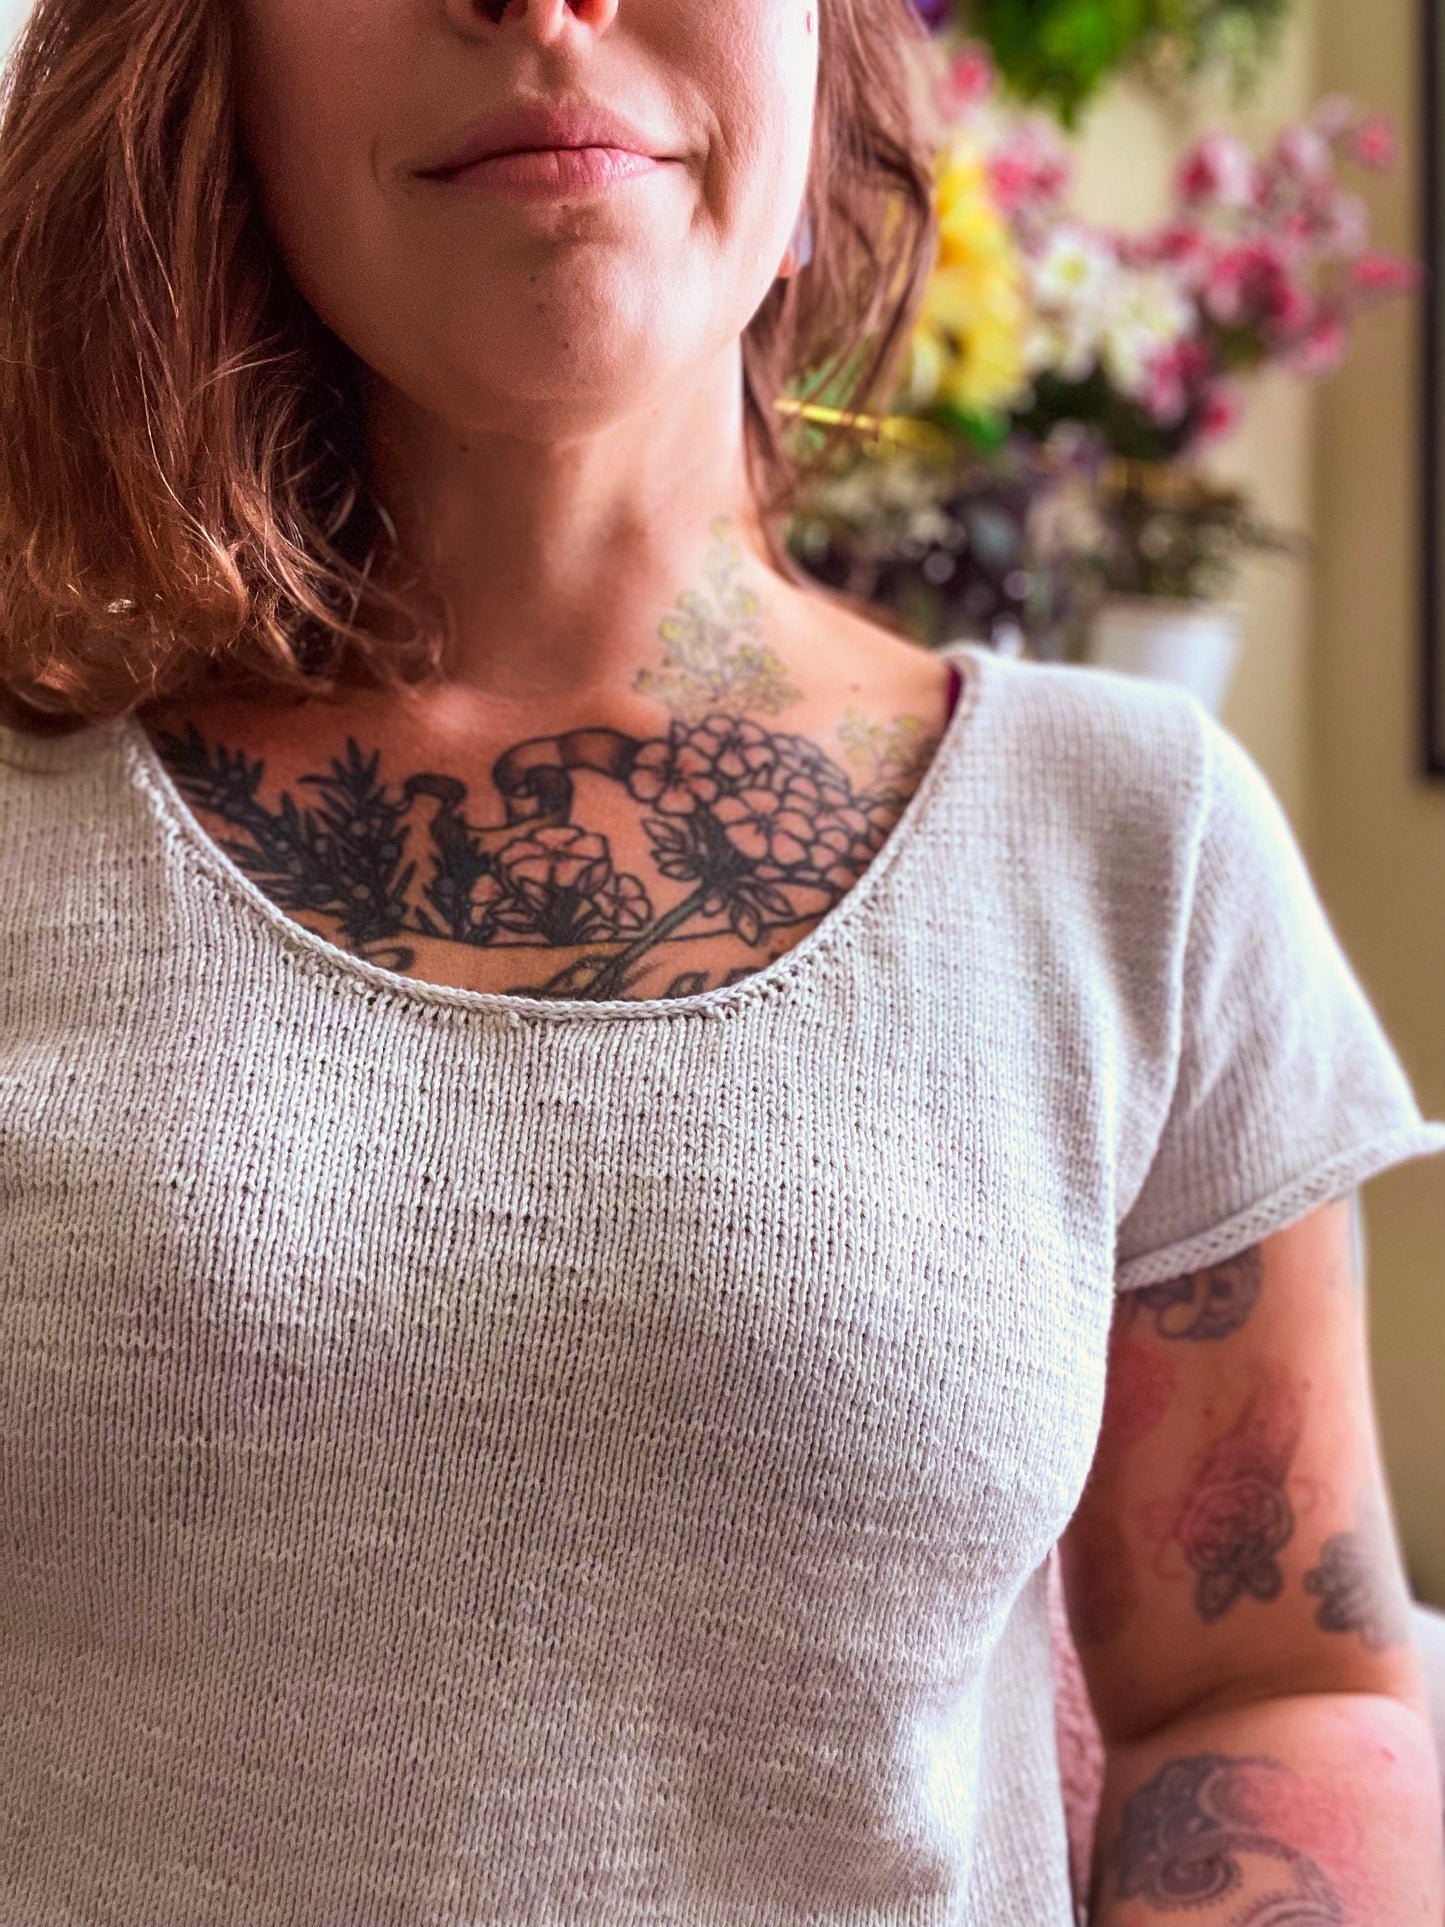 Seen close up, Bess wears a white, hand knit tee with an i-cord egde on the neckline and sleeves. Flowers can be seen in the background.